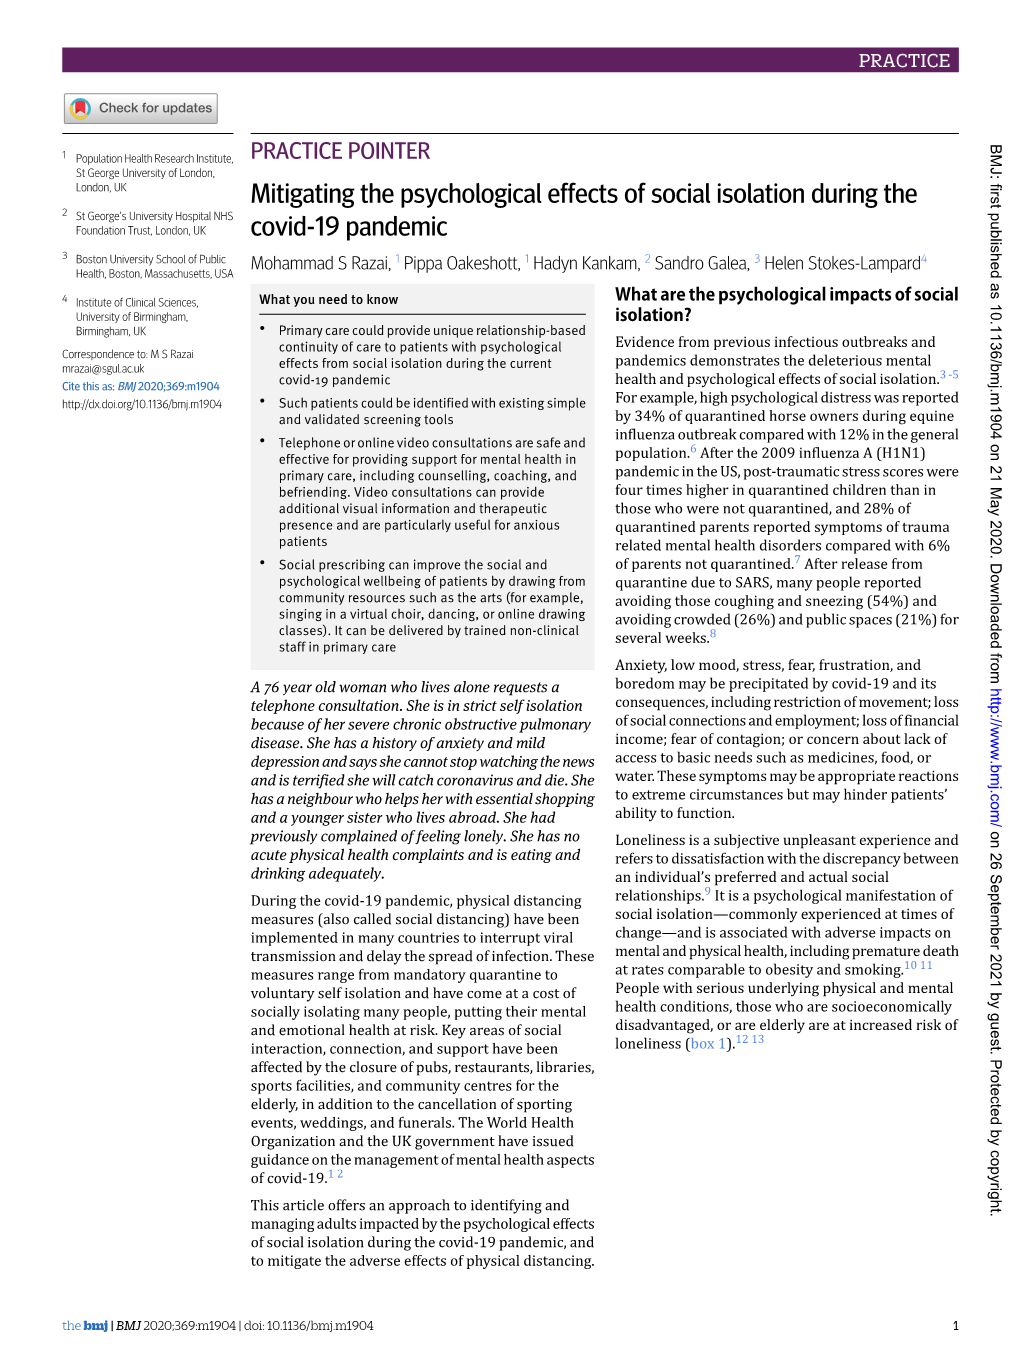 Mitigating the Psychological Effects of Social Isolation During the Covid-19